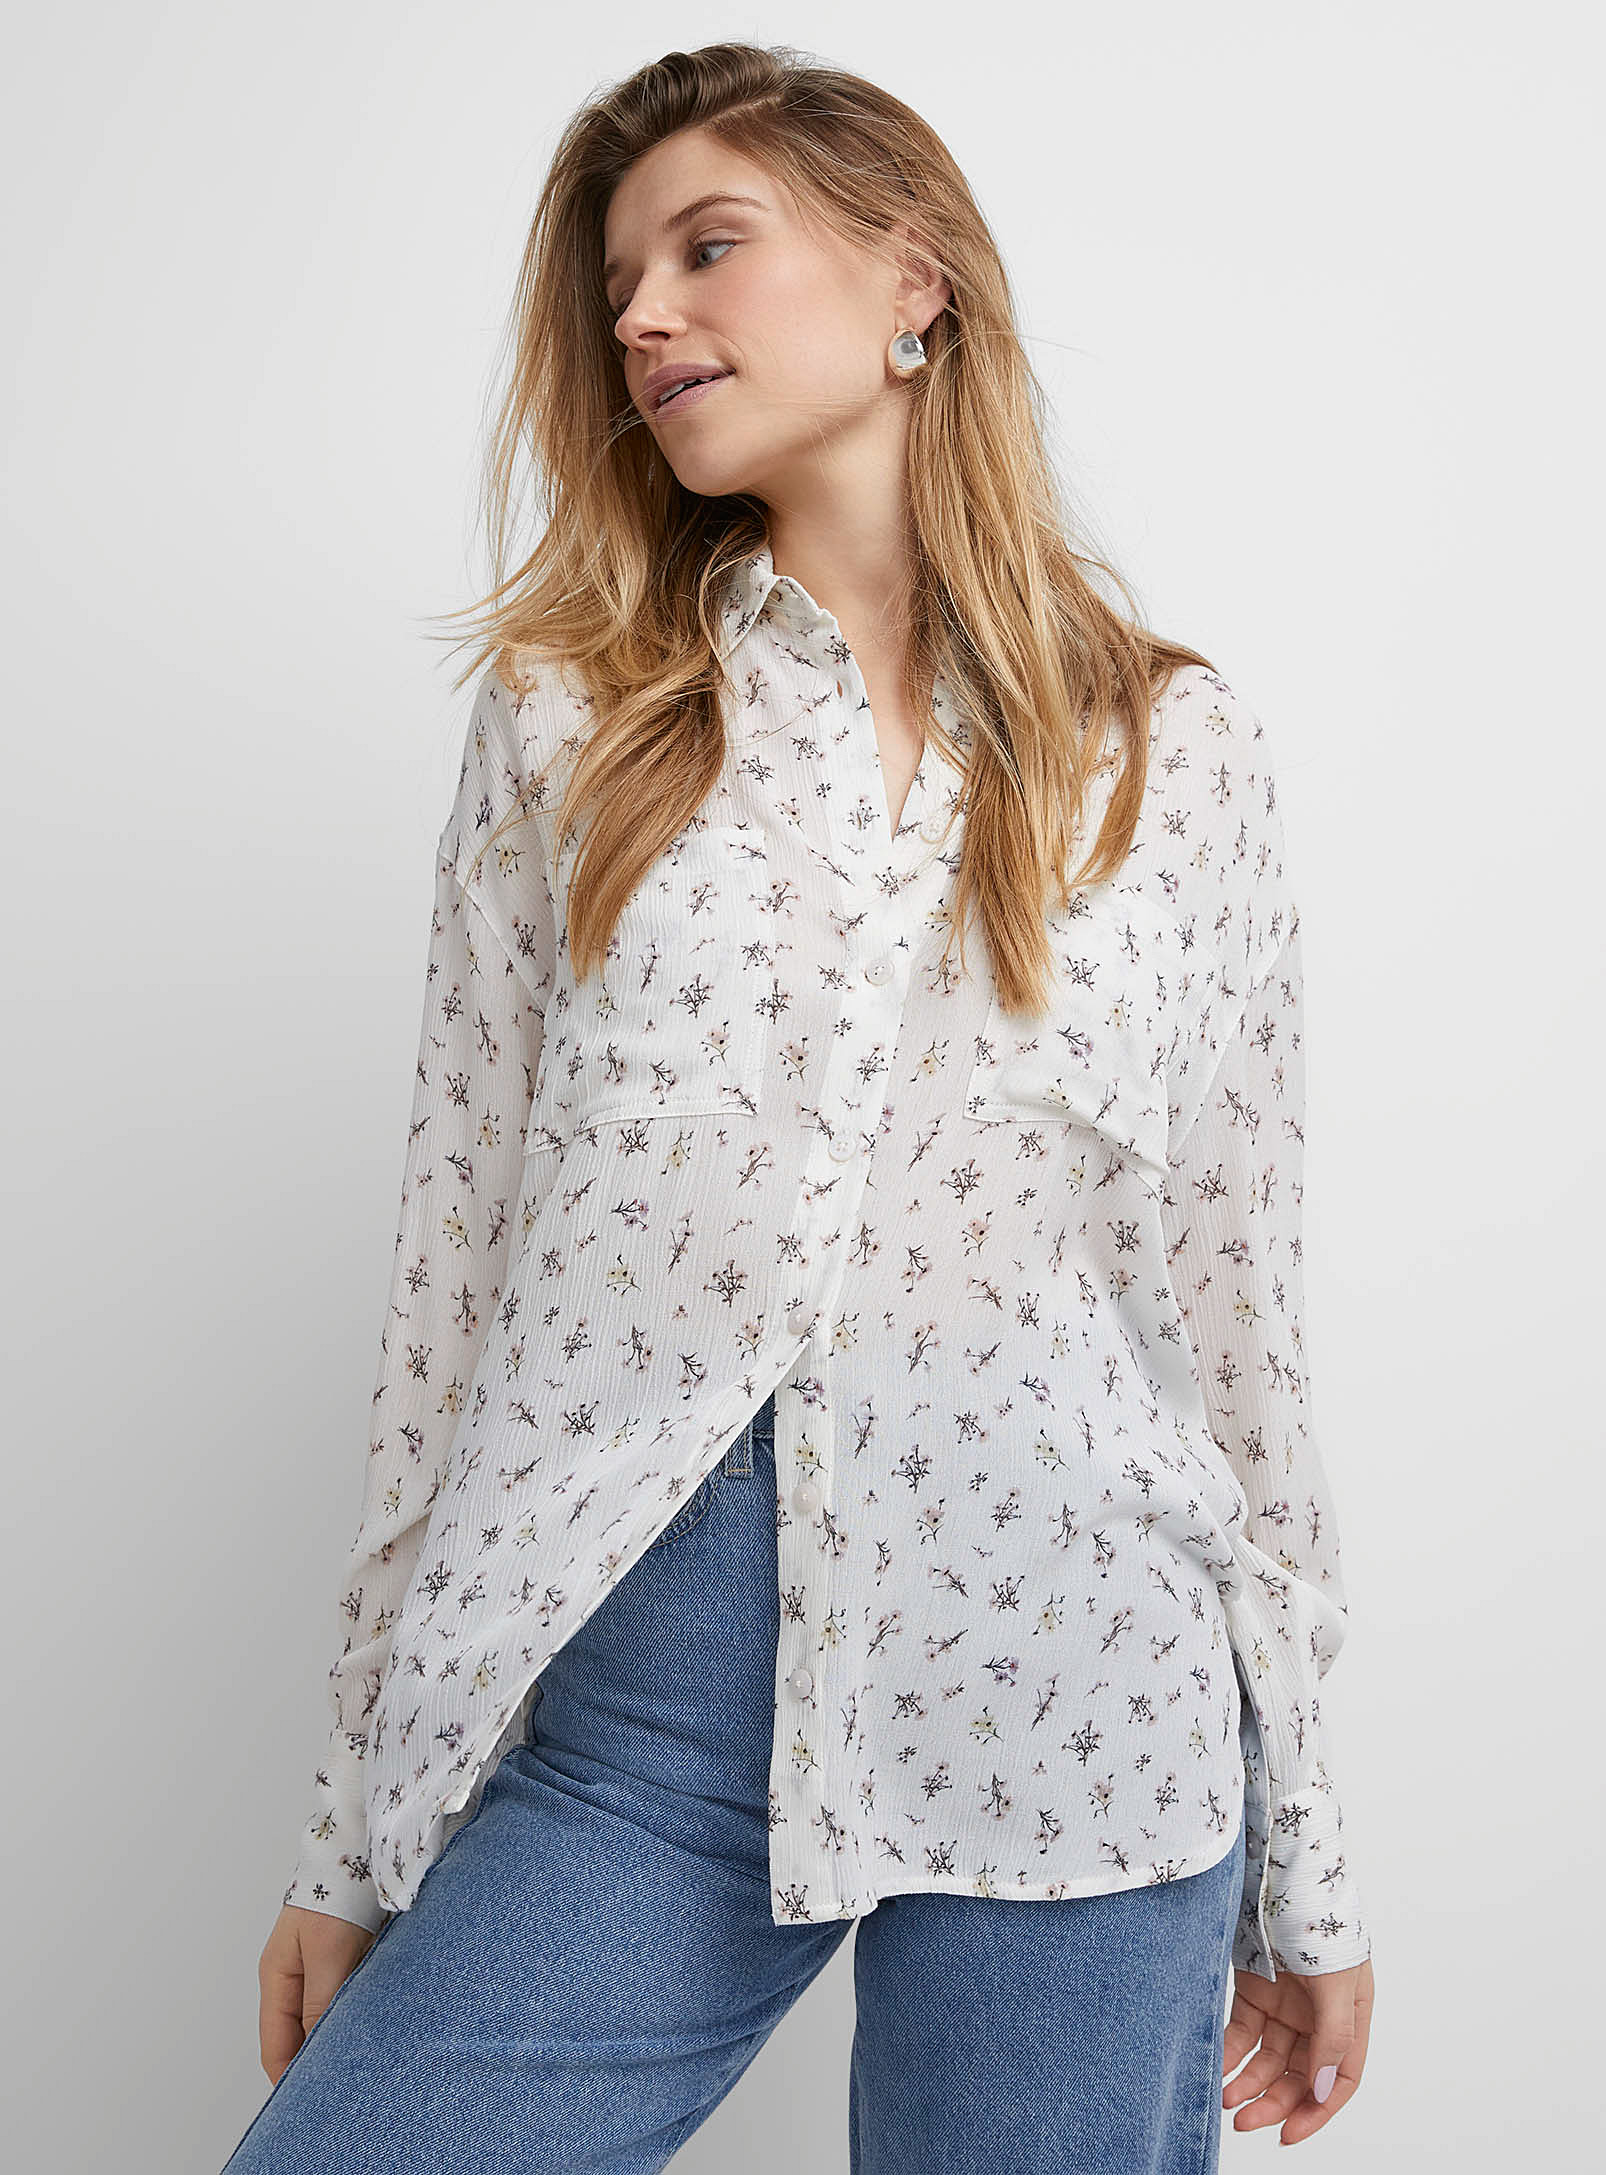 Icône - Women's Loose crinkled texture printed shirt